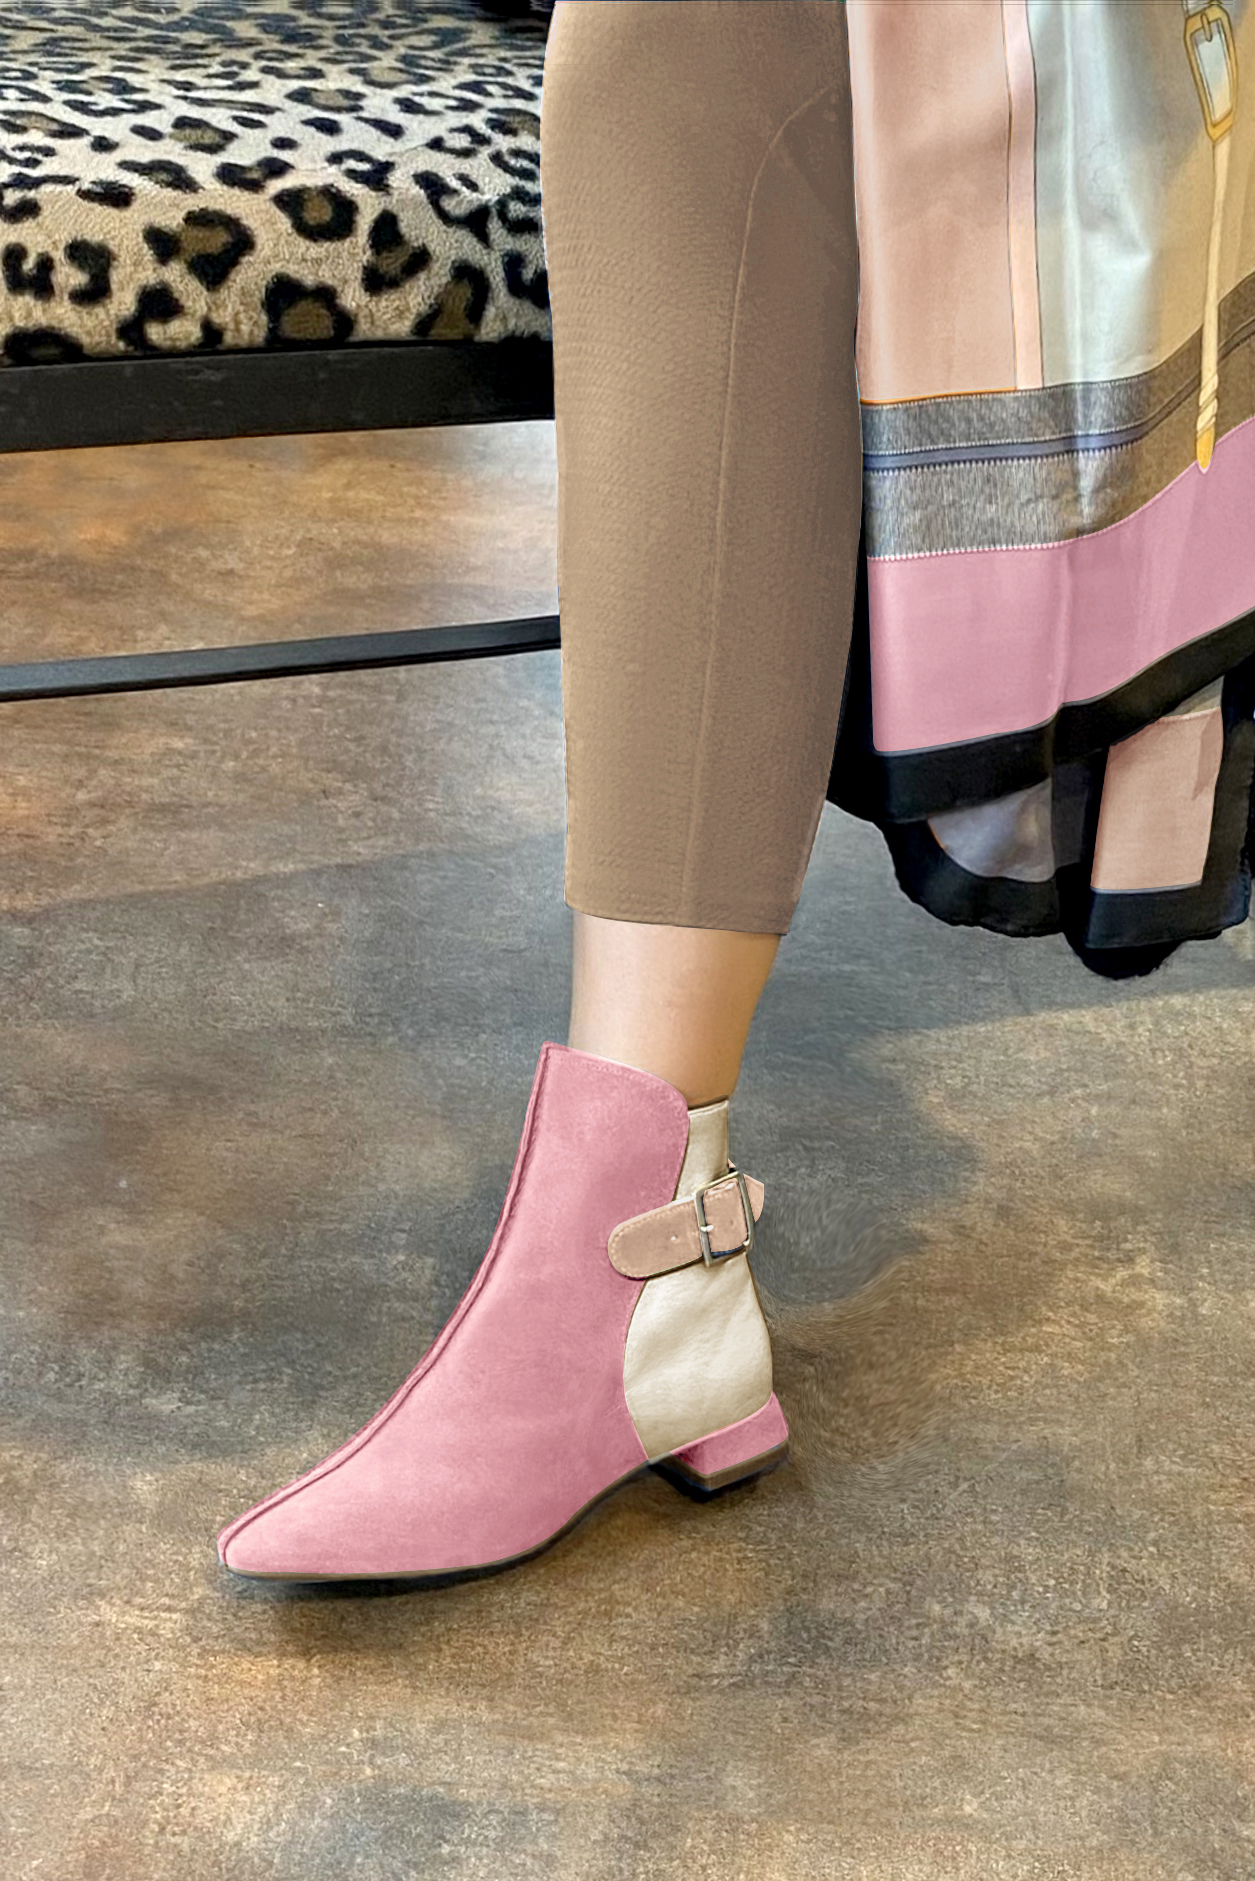 Carnation pink, gold and biscuit beige women's ankle boots with buckles at the back. Square toe. Flat flare heels. Worn view - Florence KOOIJMAN